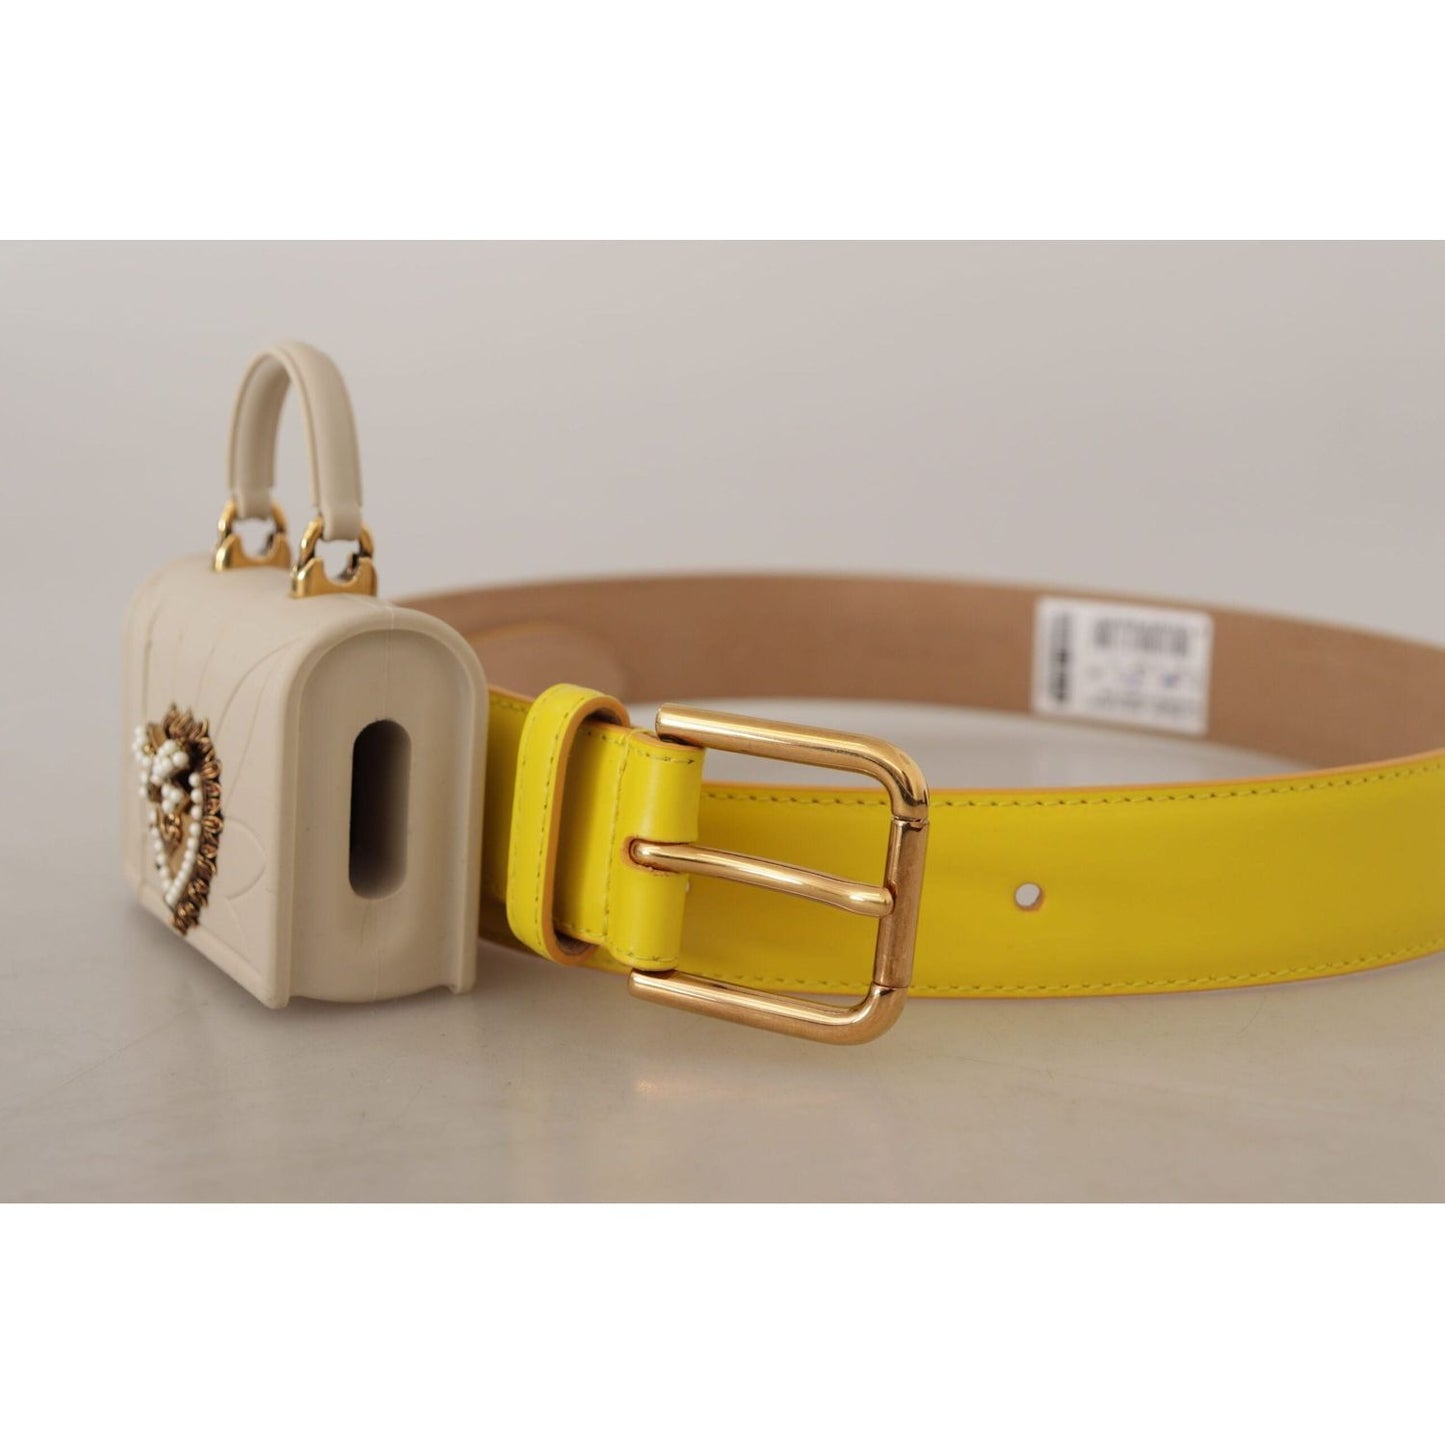 Dolce & Gabbana Chic Yellow Leather Belt with Headphone Case yellow-leather-devotion-heart-micro-bag-headphones-belt